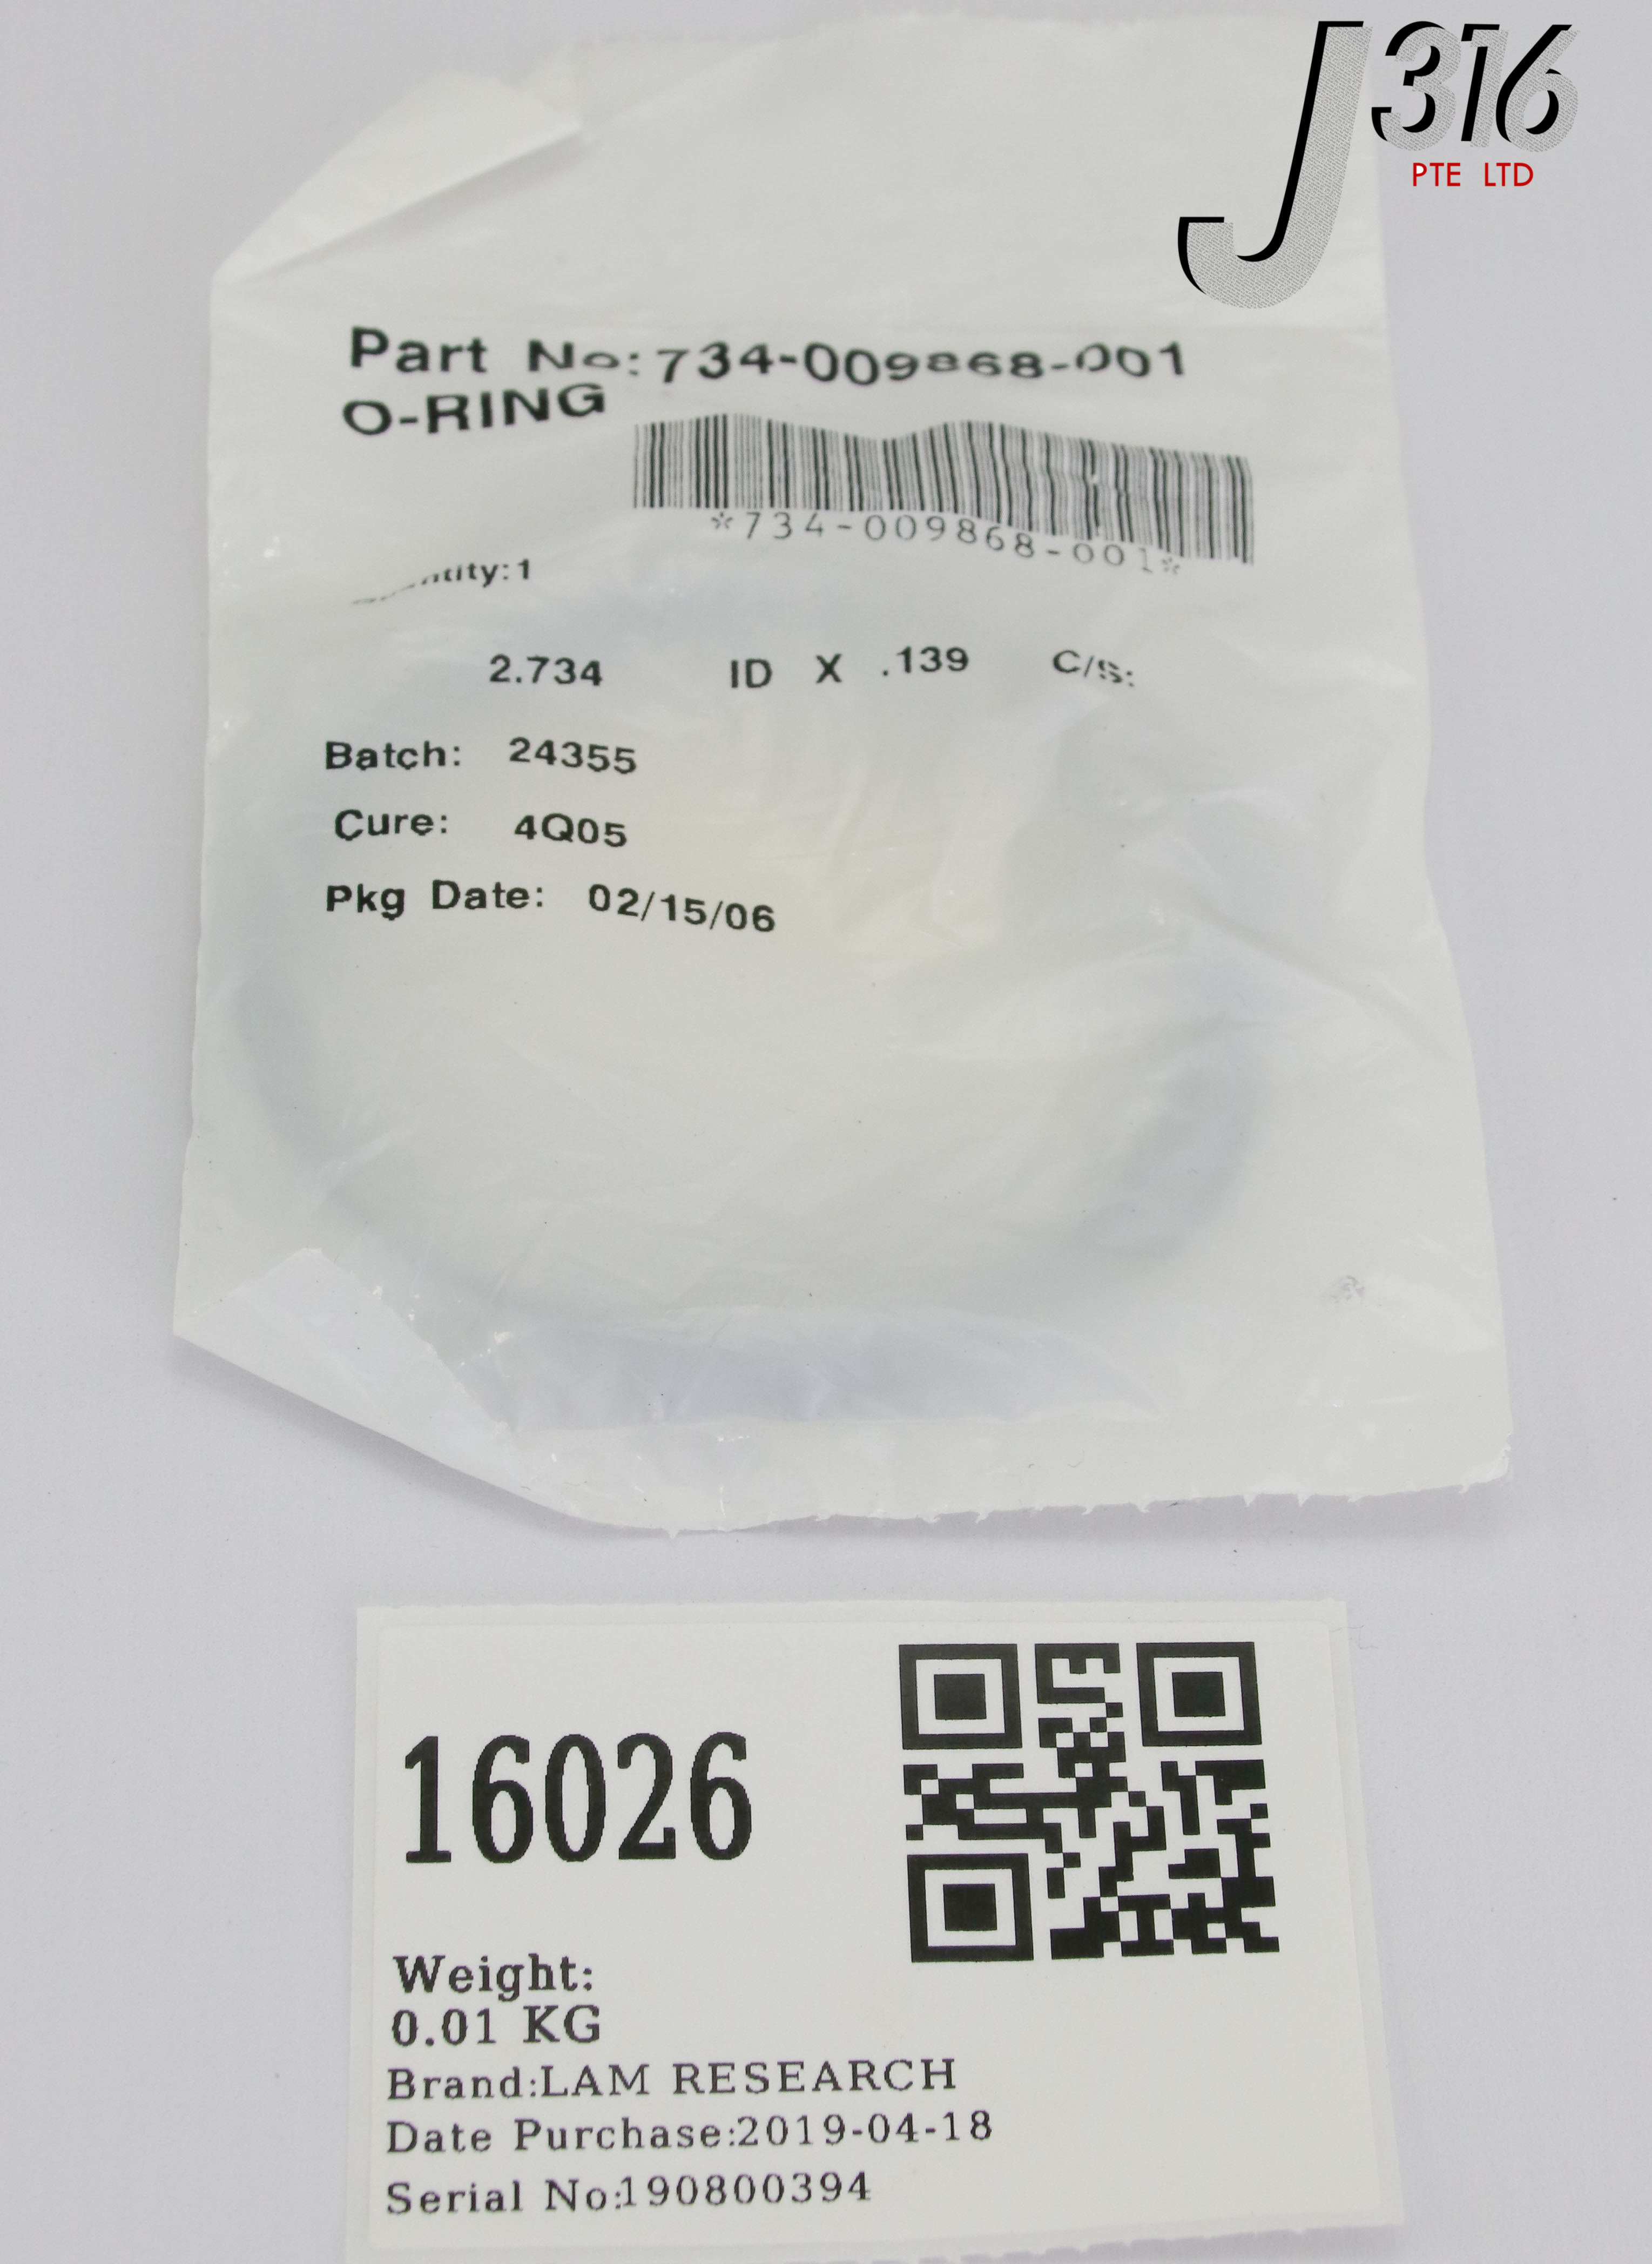 Chemraz O Ring 0 984 Id X 0 139 Cx Gt 9214 Sc515 New As 568a 214 Cpd 515 Business Industrial Other Process Engineering Equipment Ponycobandhorsesaddles Com